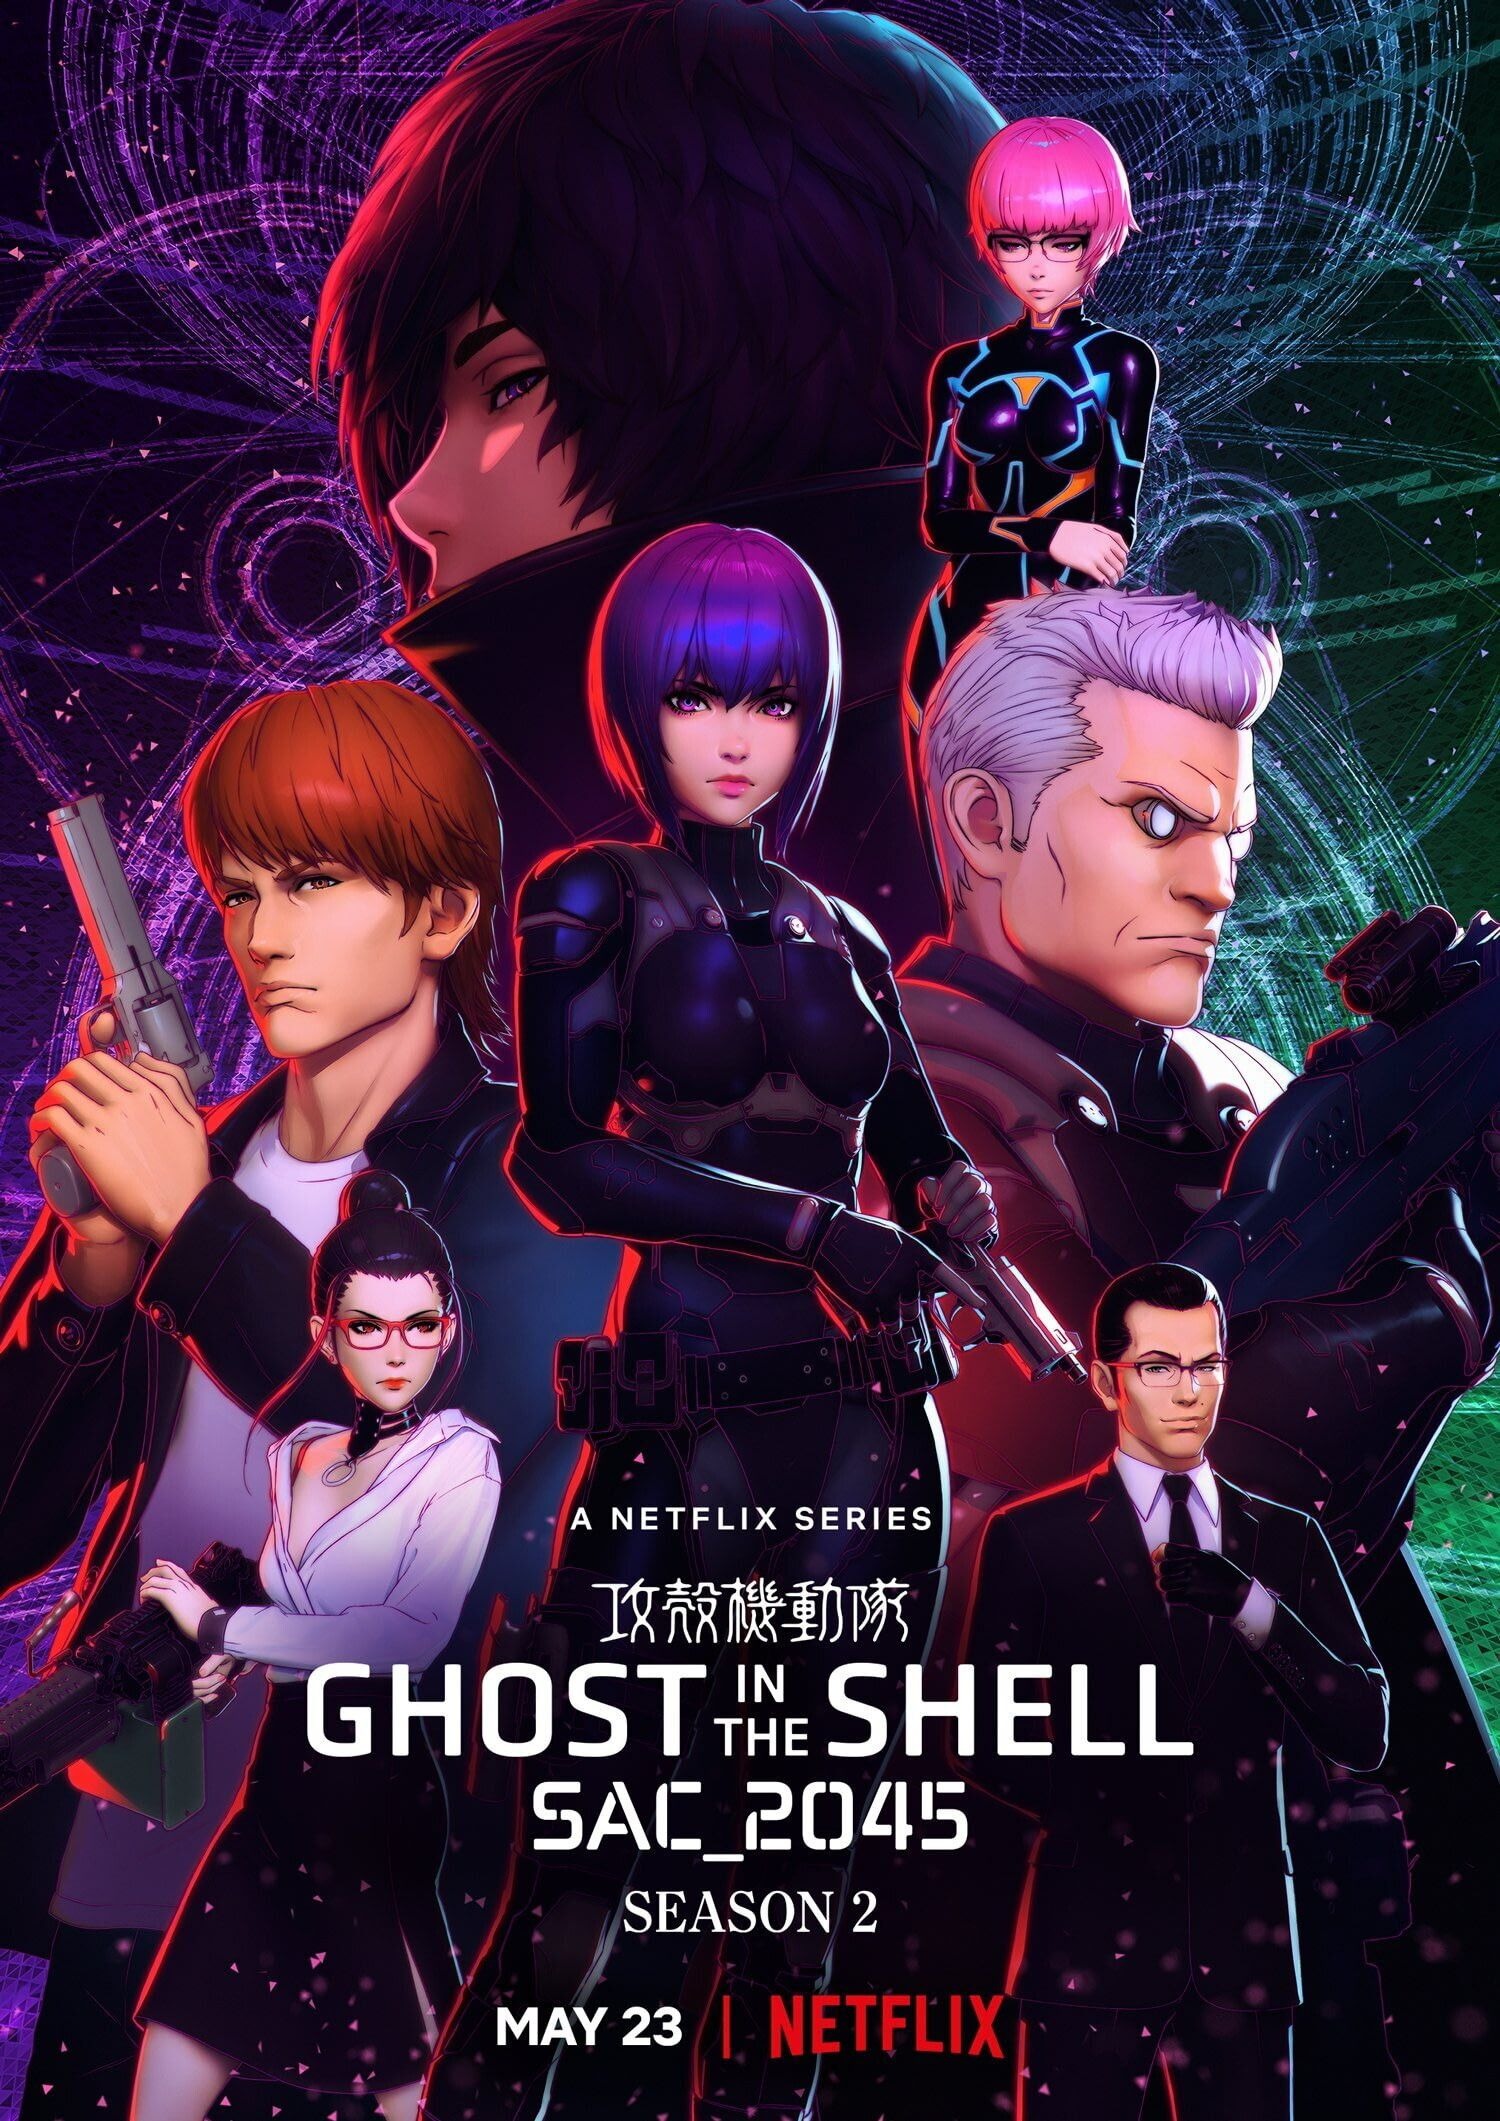 Mega Sized TV Poster Image for Ghost in the Shell SAC_2045 (#3 of 5)